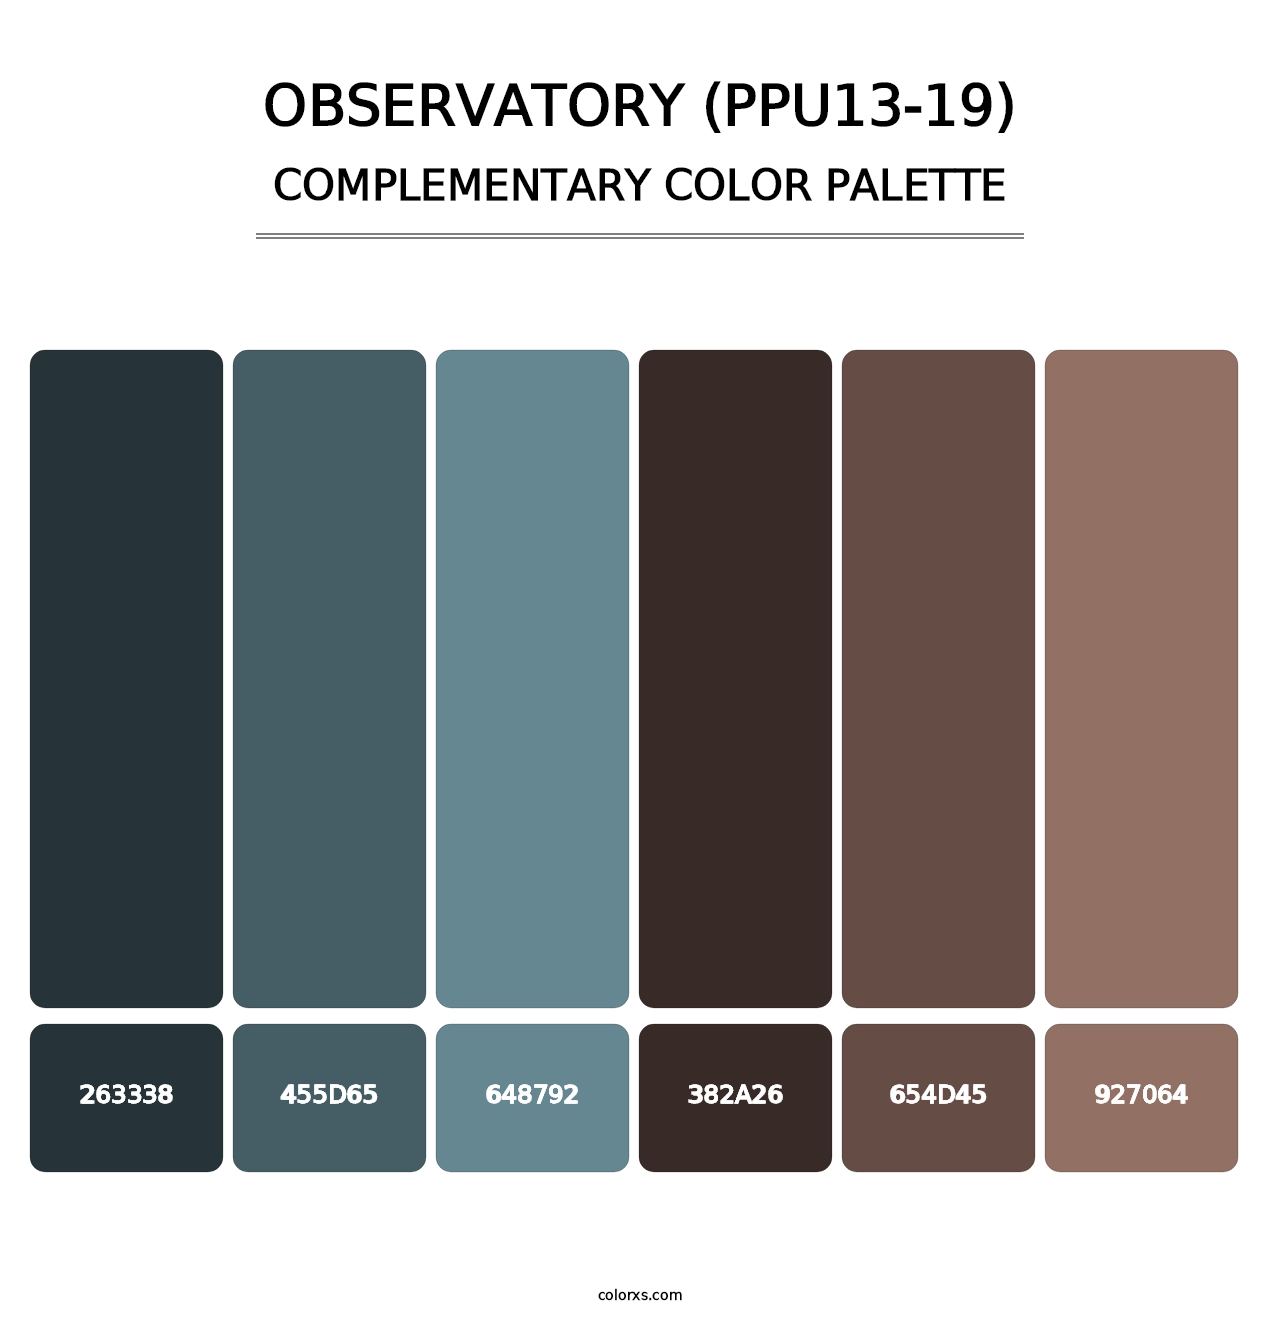 Observatory (PPU13-19) - Complementary Color Palette